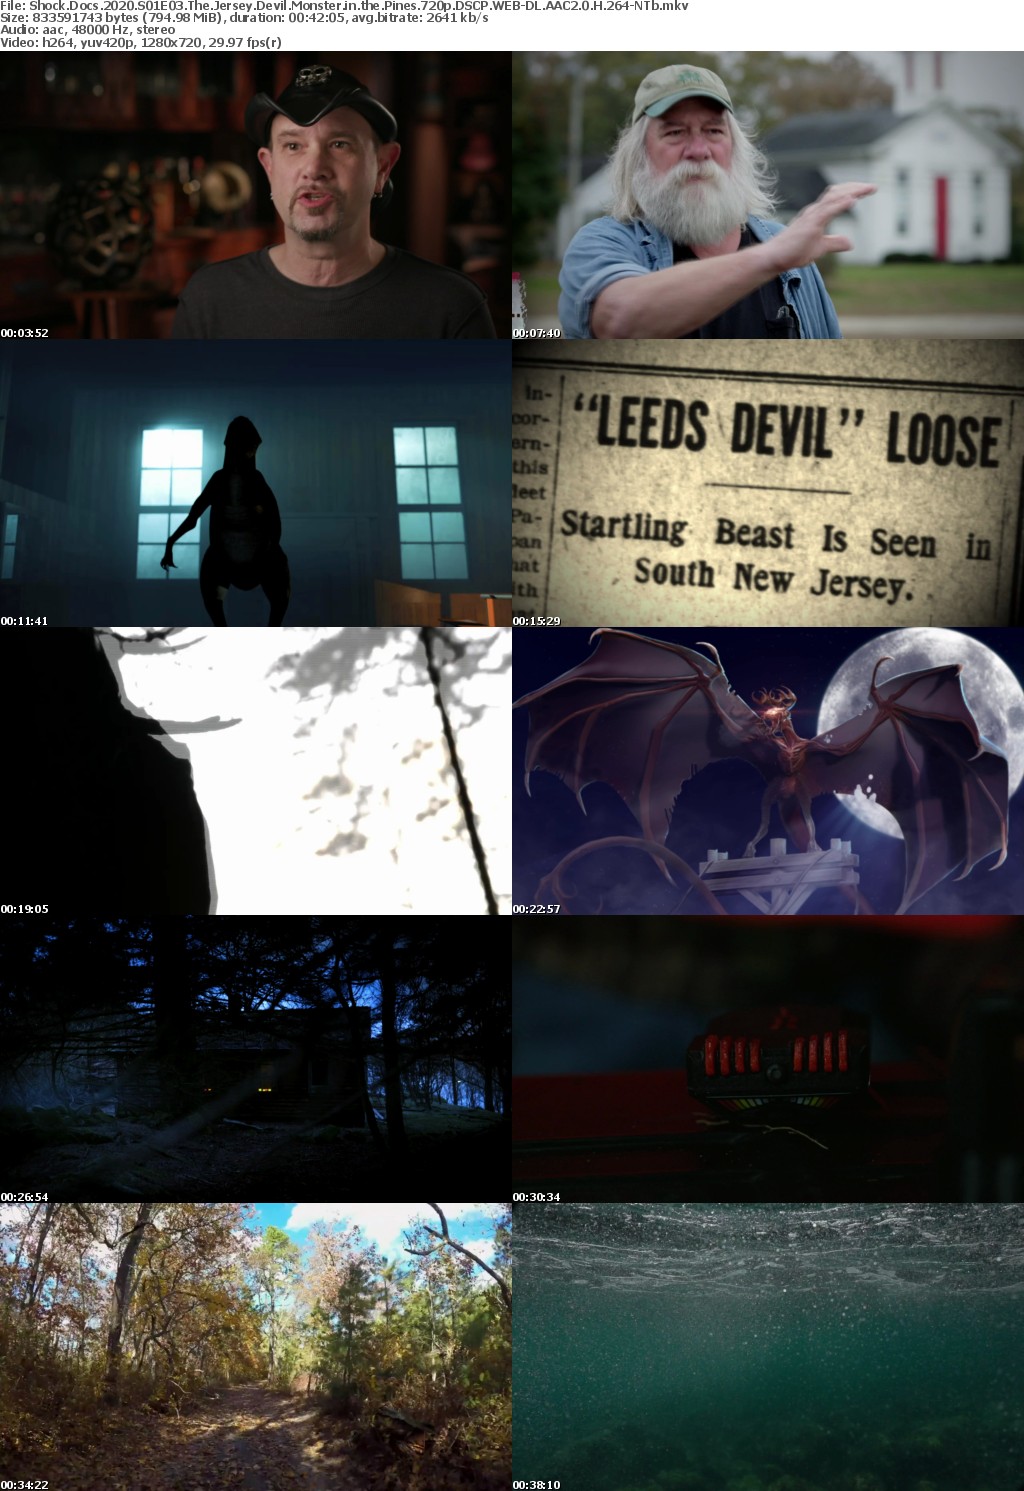 Shock Docs 2020 S01E03 The Jersey Devil Monster in the Pines 720p DSCP WEB-DL AAC2 0 H 264-NTb